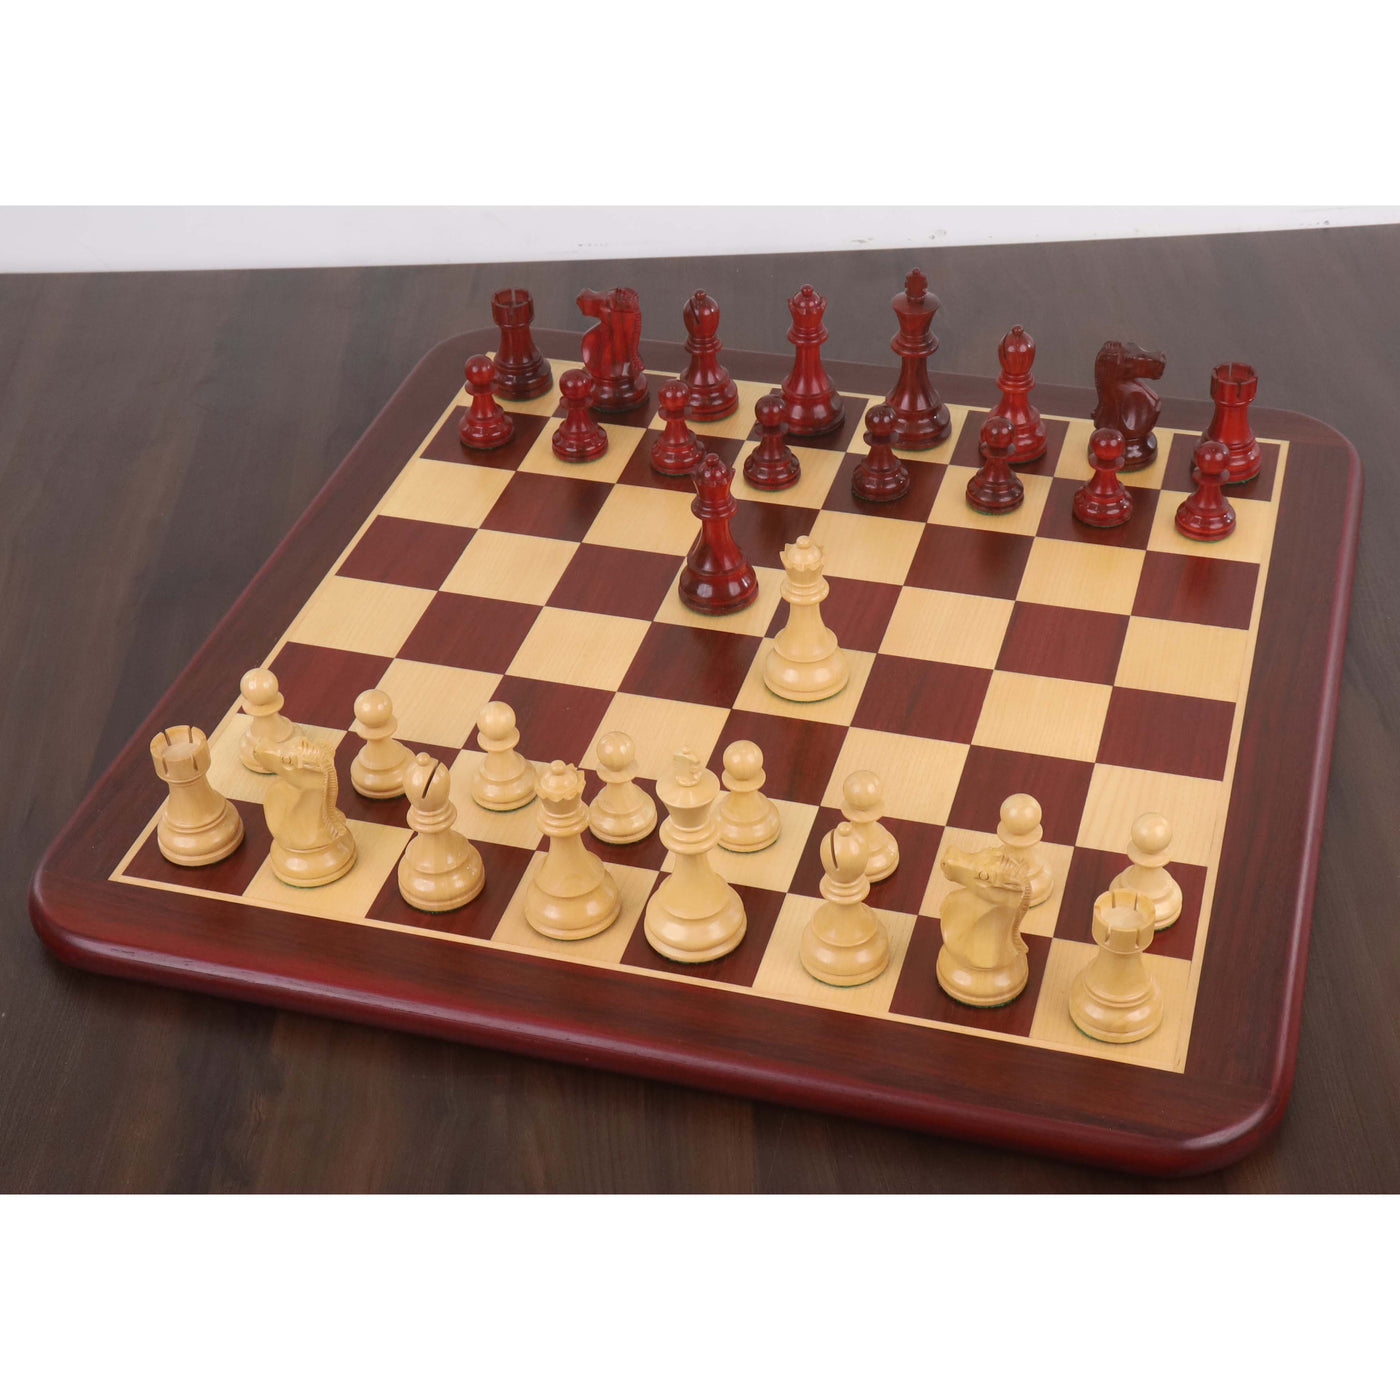 1972 Championship Fischer Spassky Chess Set - Chess Pieces Only - Double Weighted Bud Rosewood